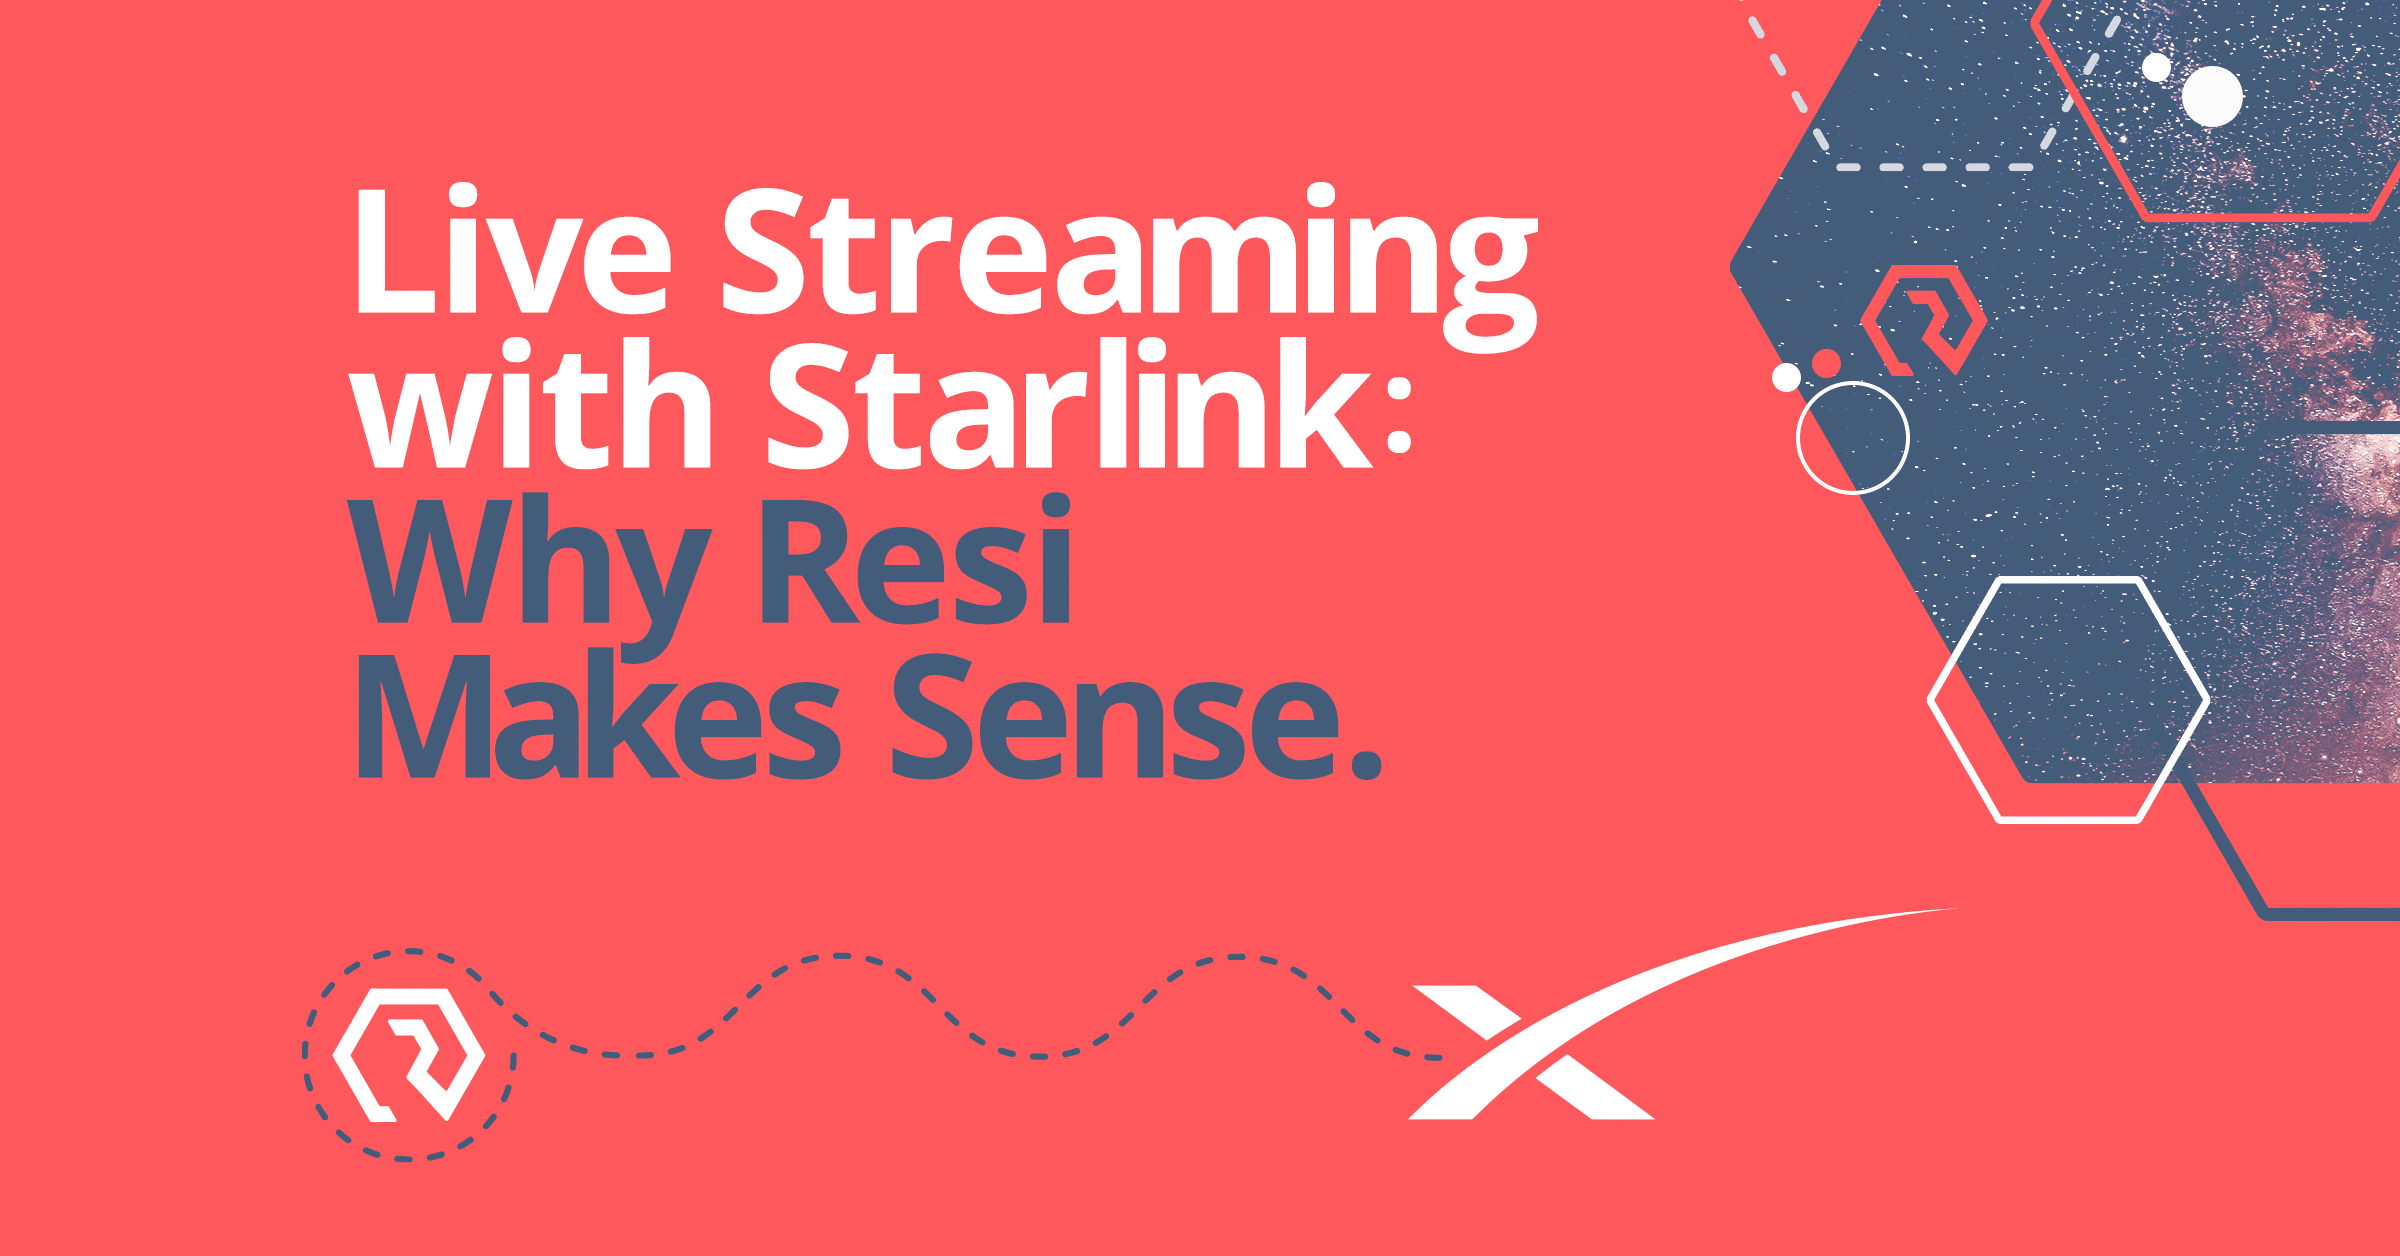 Starlink and LiveU: IP-based live streaming meets satellite